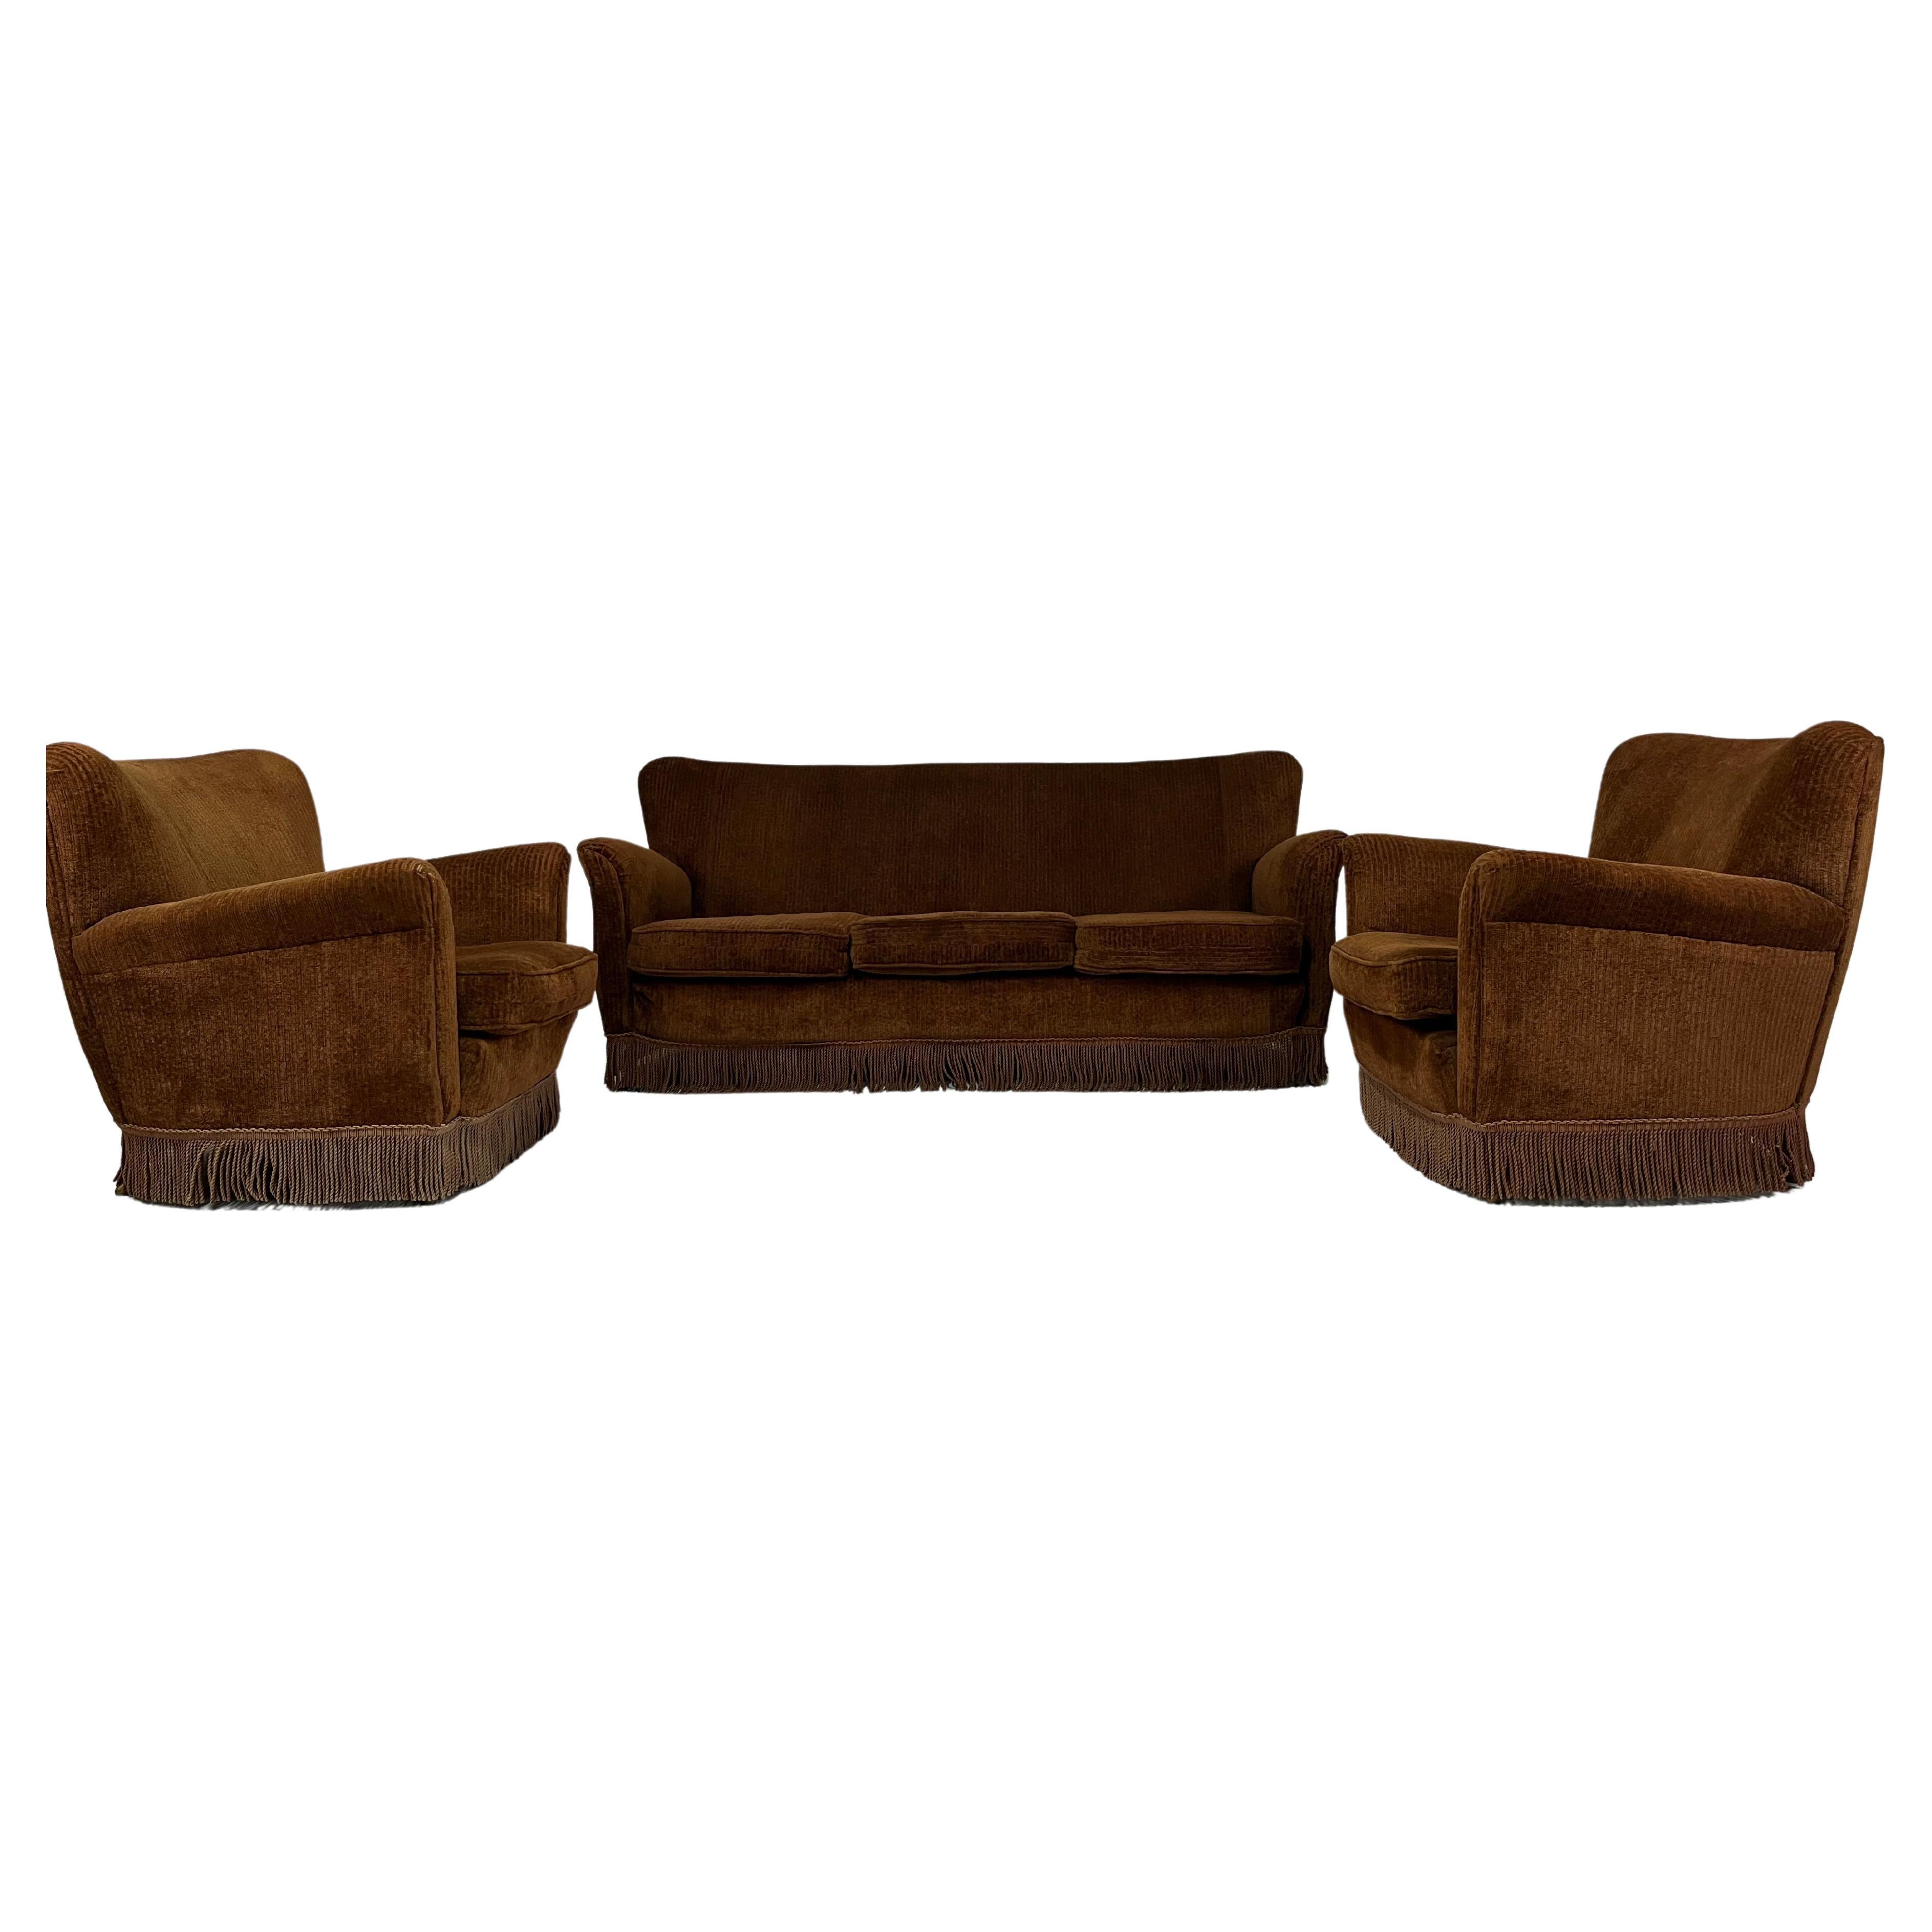 Set consisting of one sofa and two ISA velvet armchairs